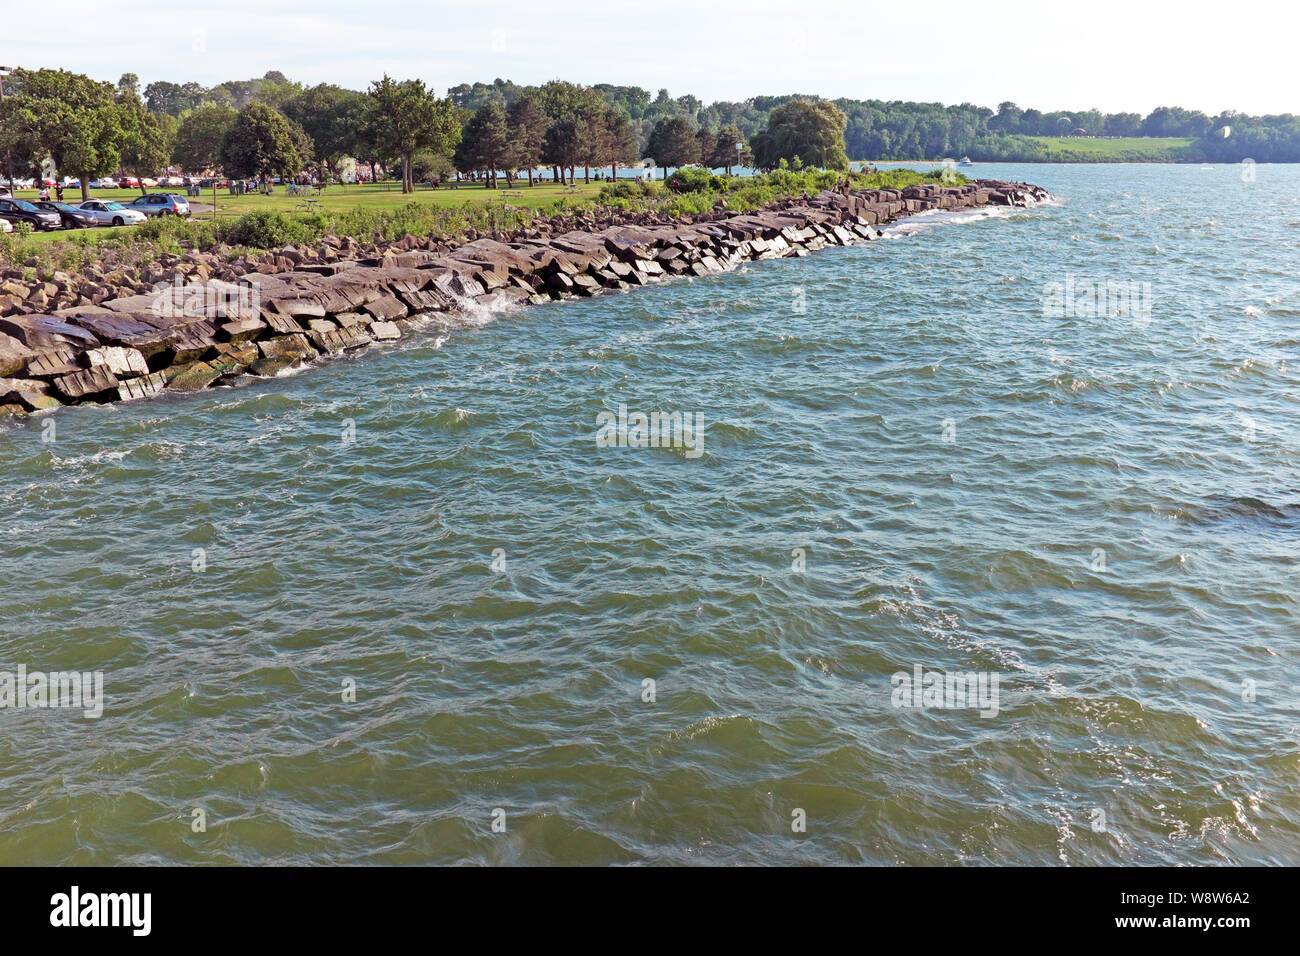 The Lake Erie shoreline near downtown Cleveland, Ohio, USA is a mecca for recreation at Edgewater Park, managed by Cleveland Metroparks. Stock Photo